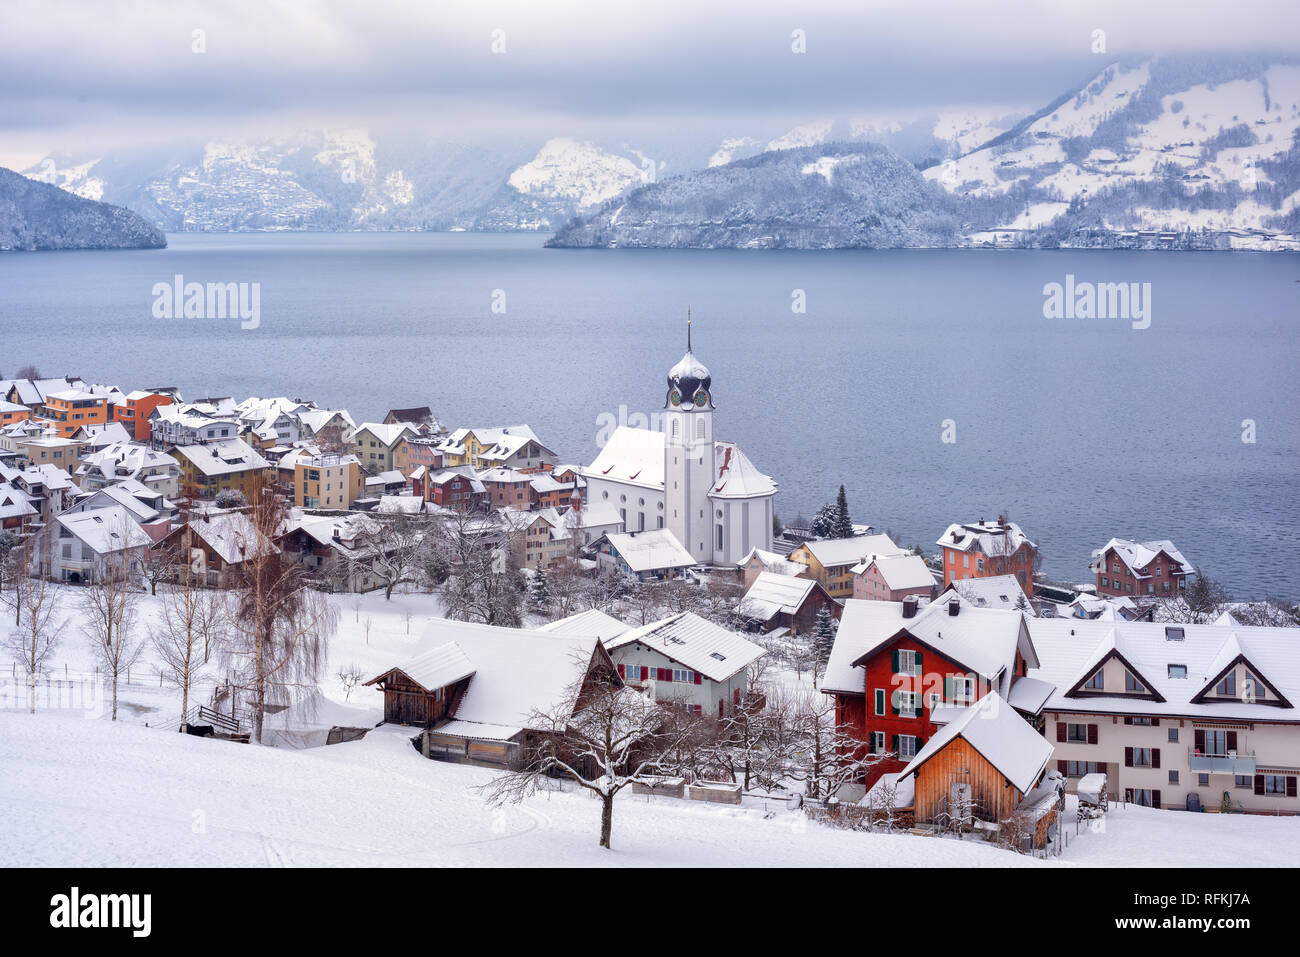 Beckenried village on Lake Lucerne, swiss Alps mountains, Switzerland, covered with white snow in winter time Stock Photo